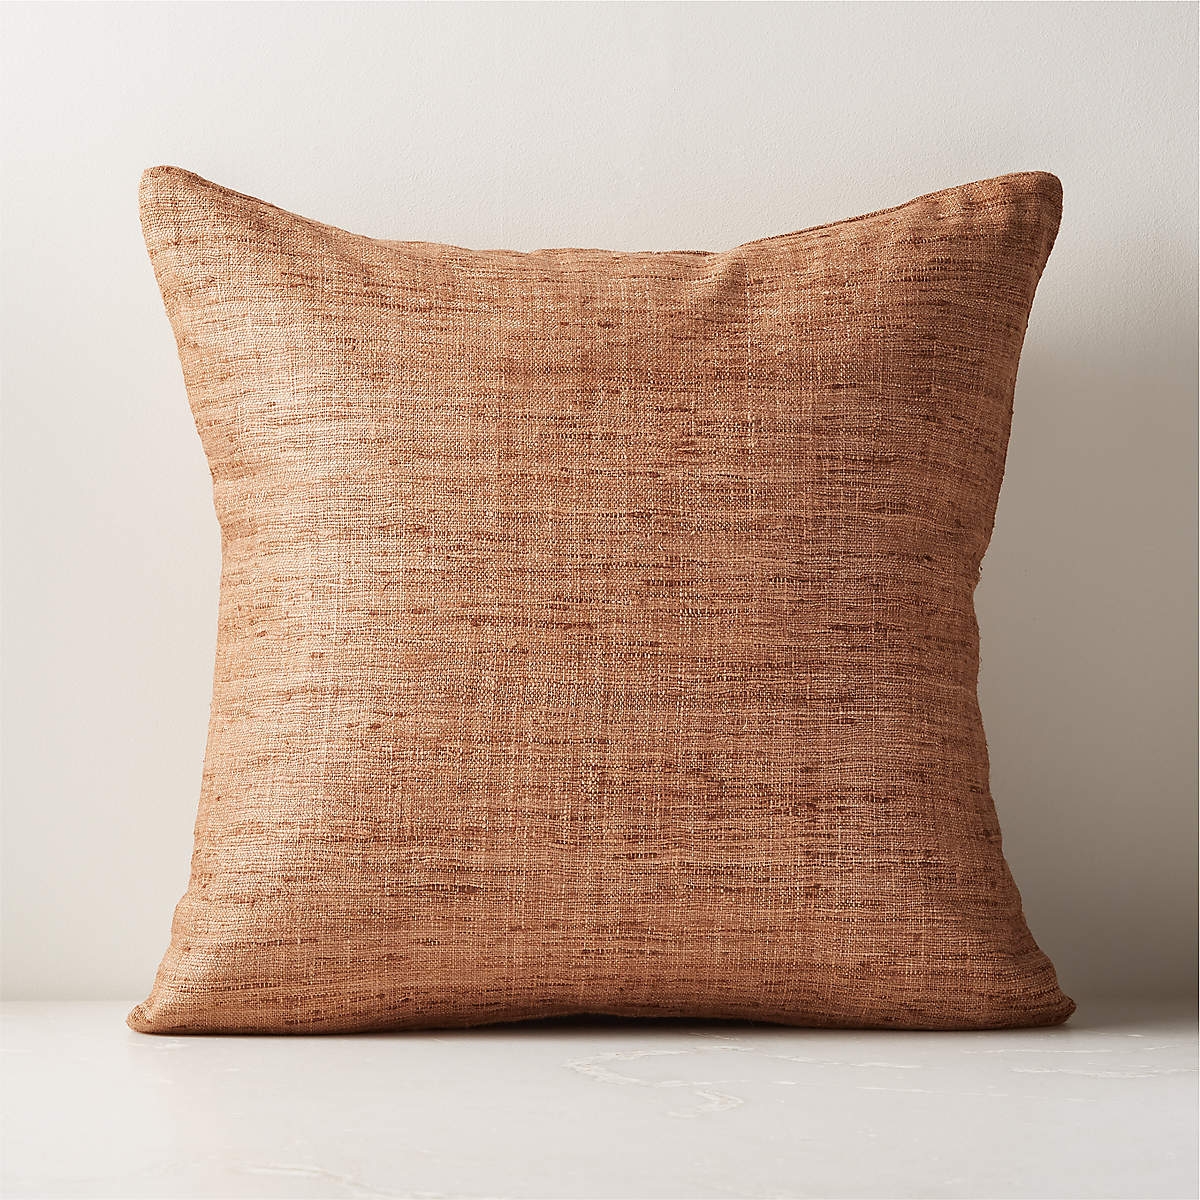 20" RAJ SILK NUDE THROW PILLOW WITH FEATHER-DOWN INSERT - Image 0